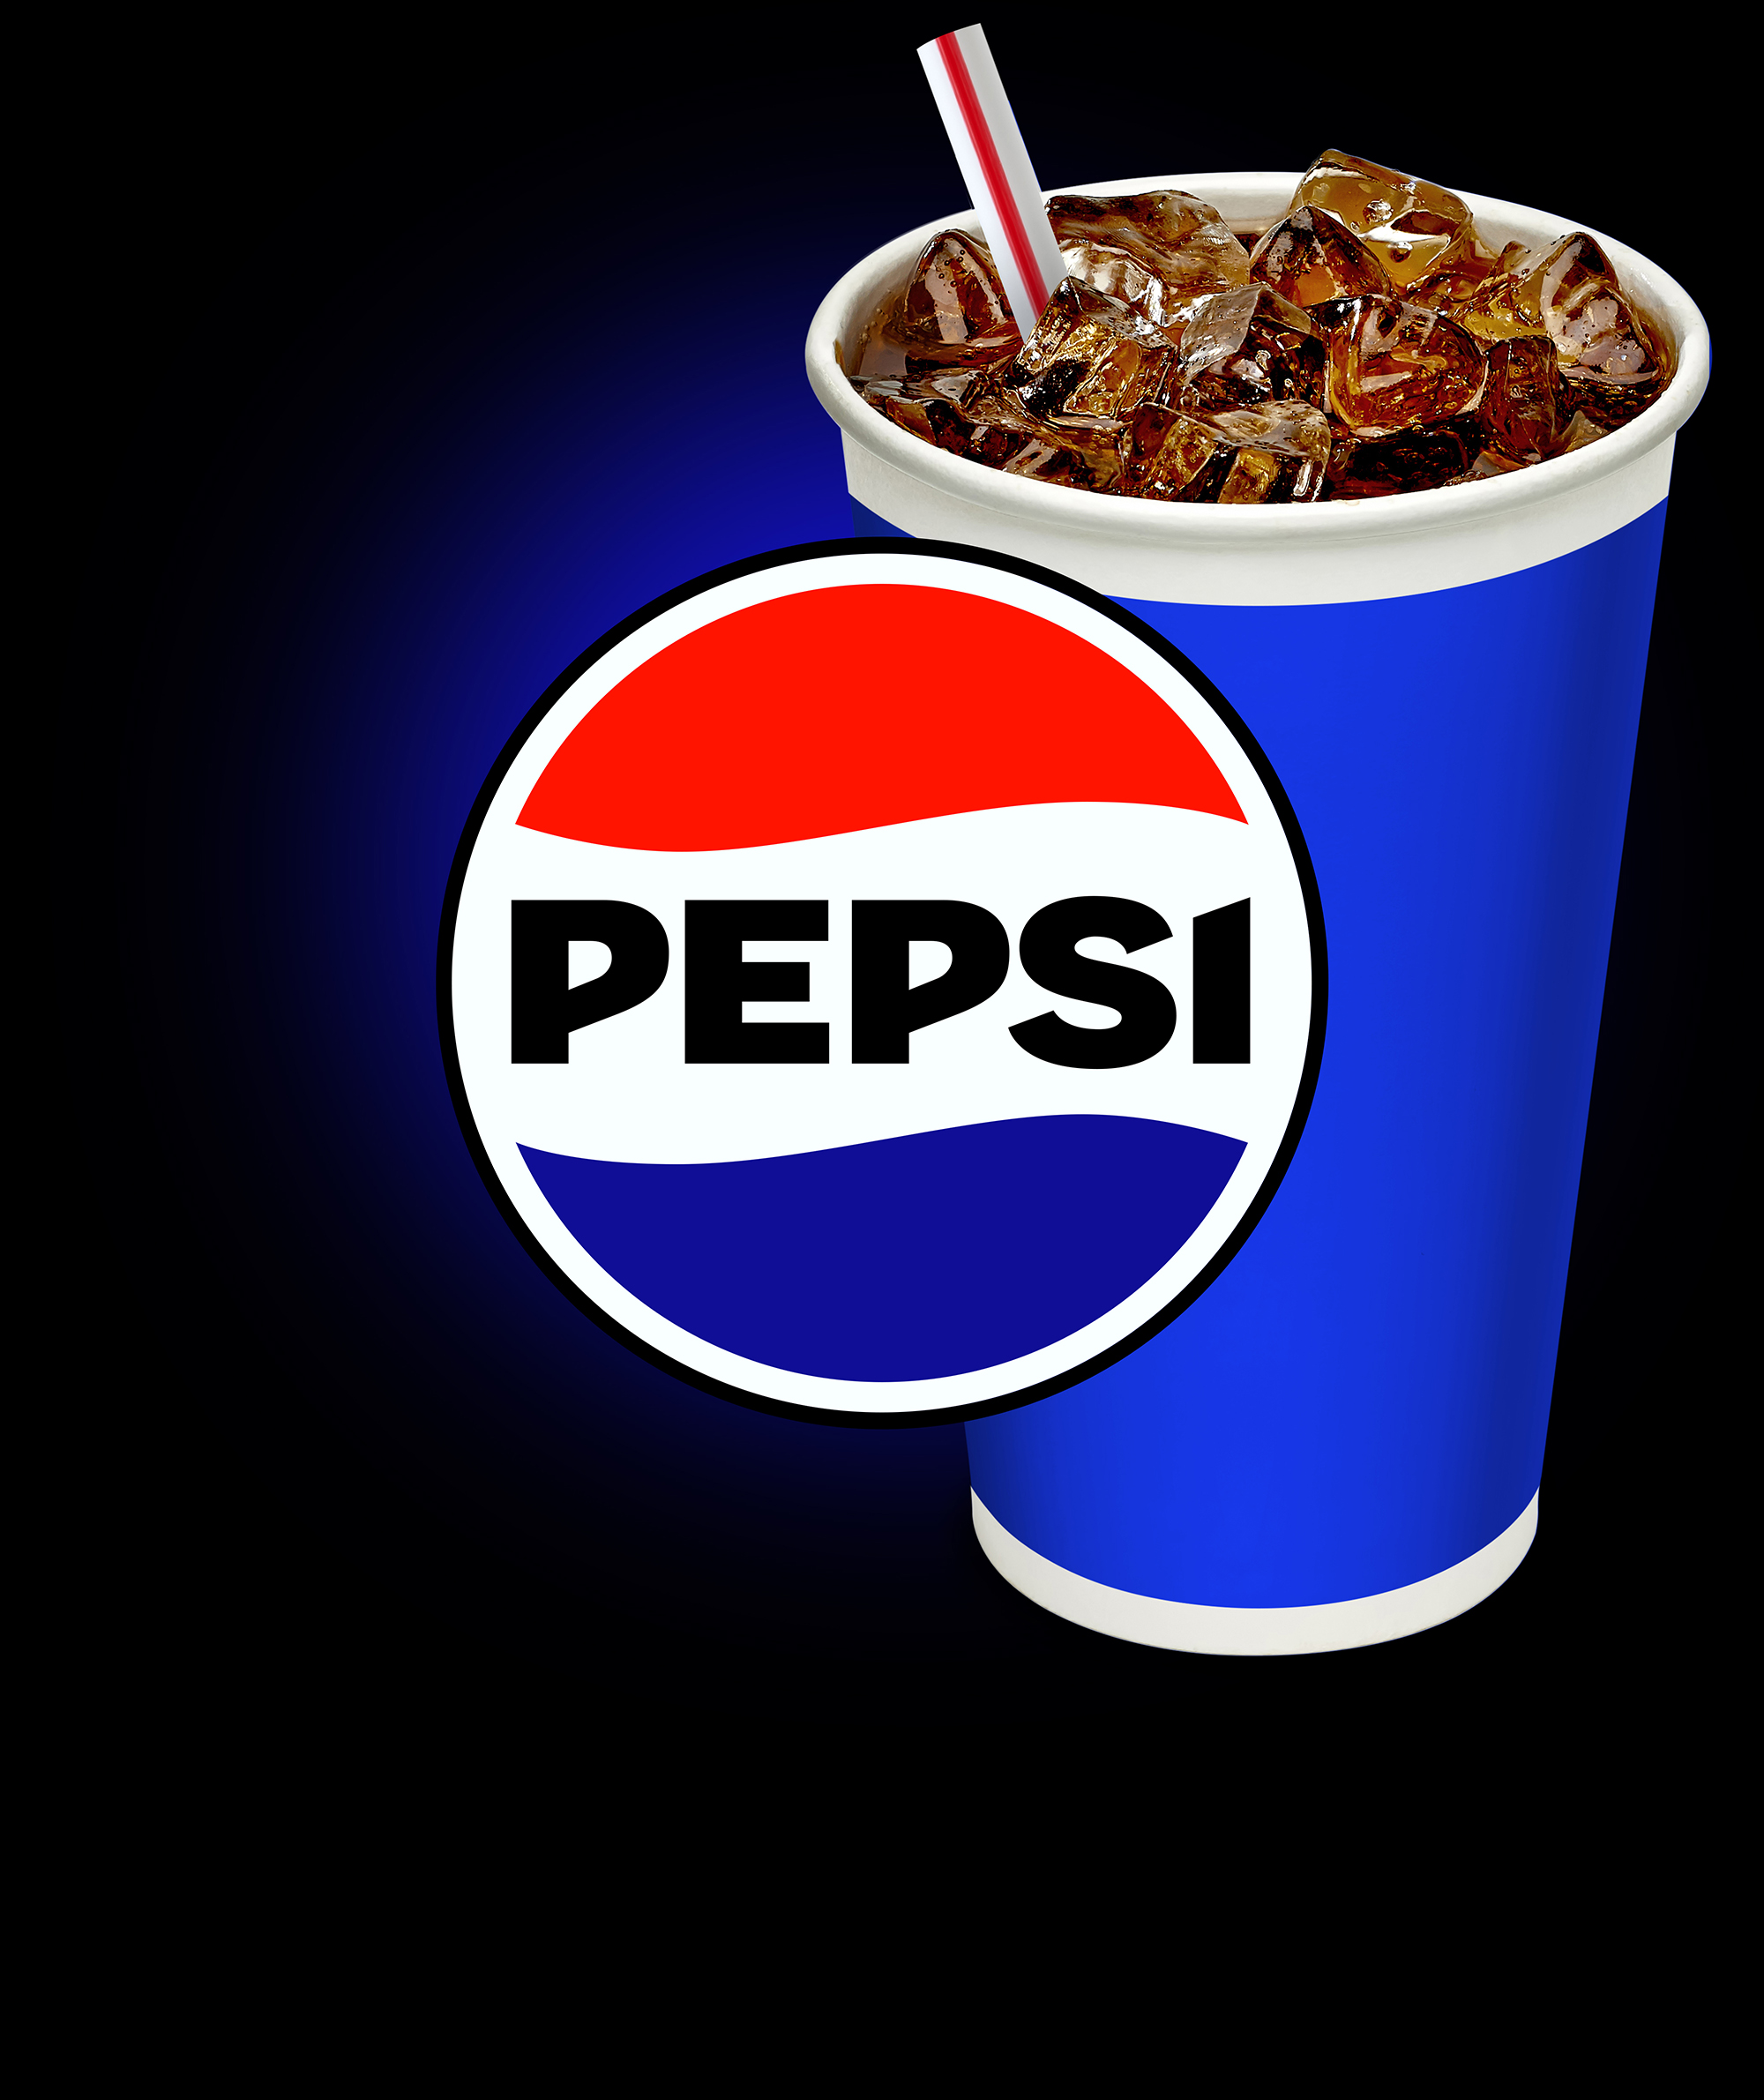 Flavor Smart Nationally Branded Products - Pepsi